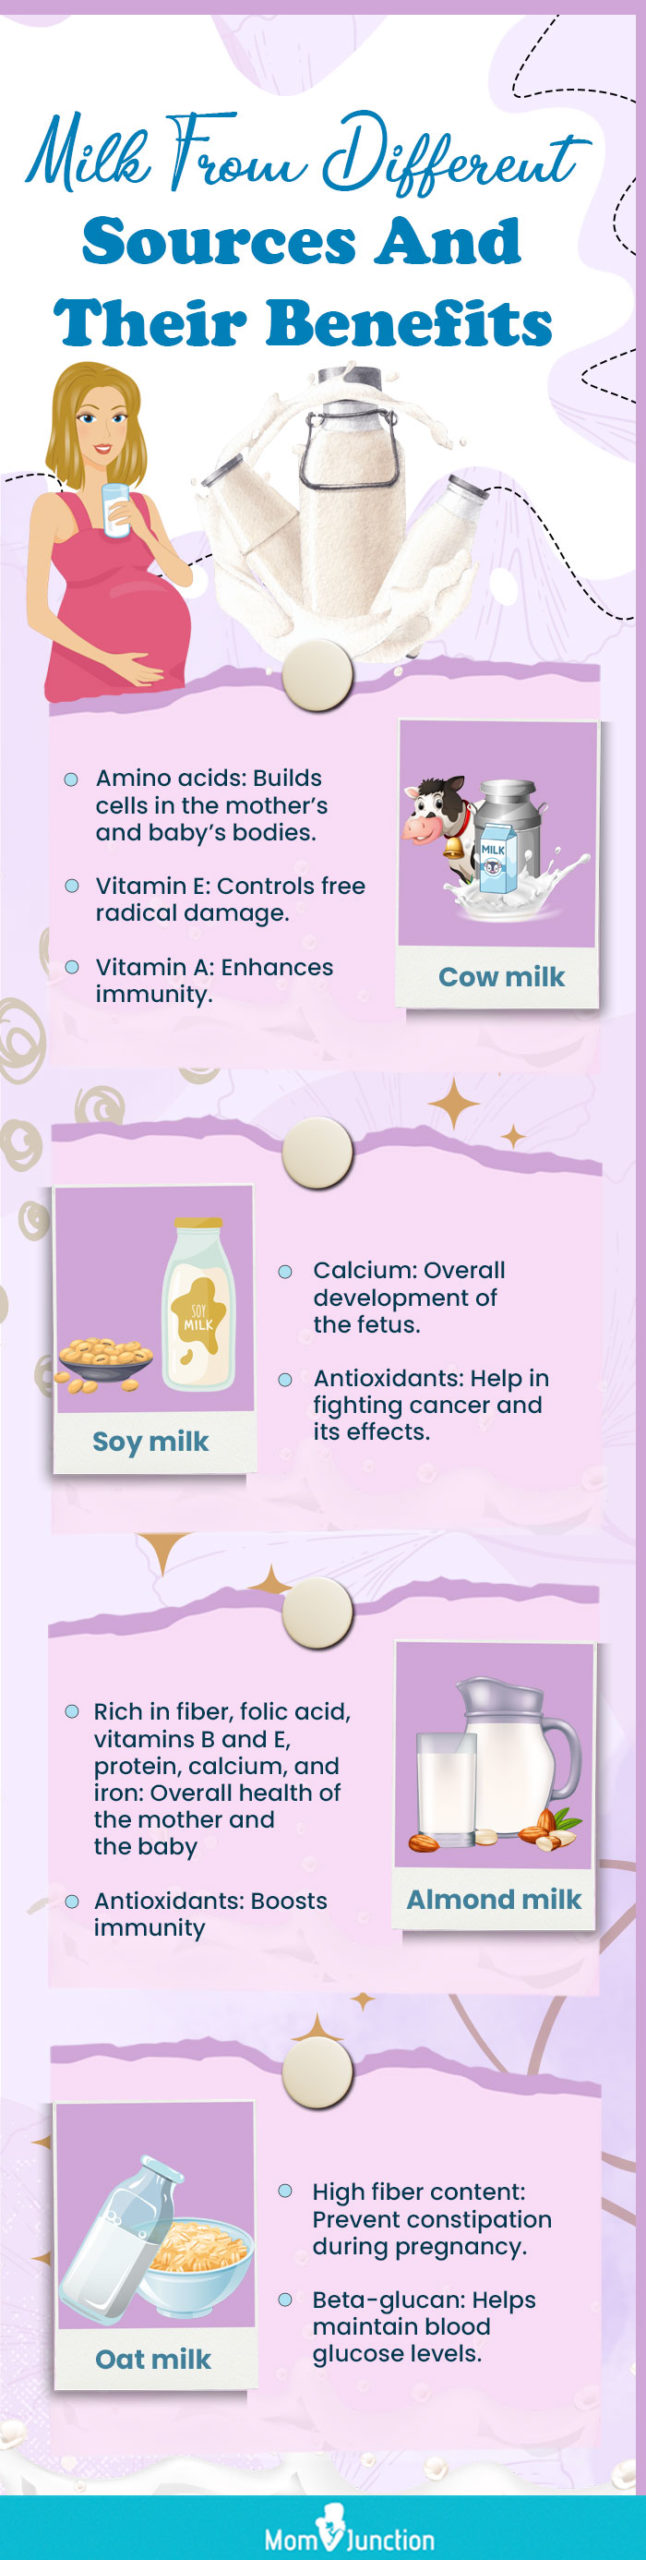 milk from different sources and their benefits (infographic)